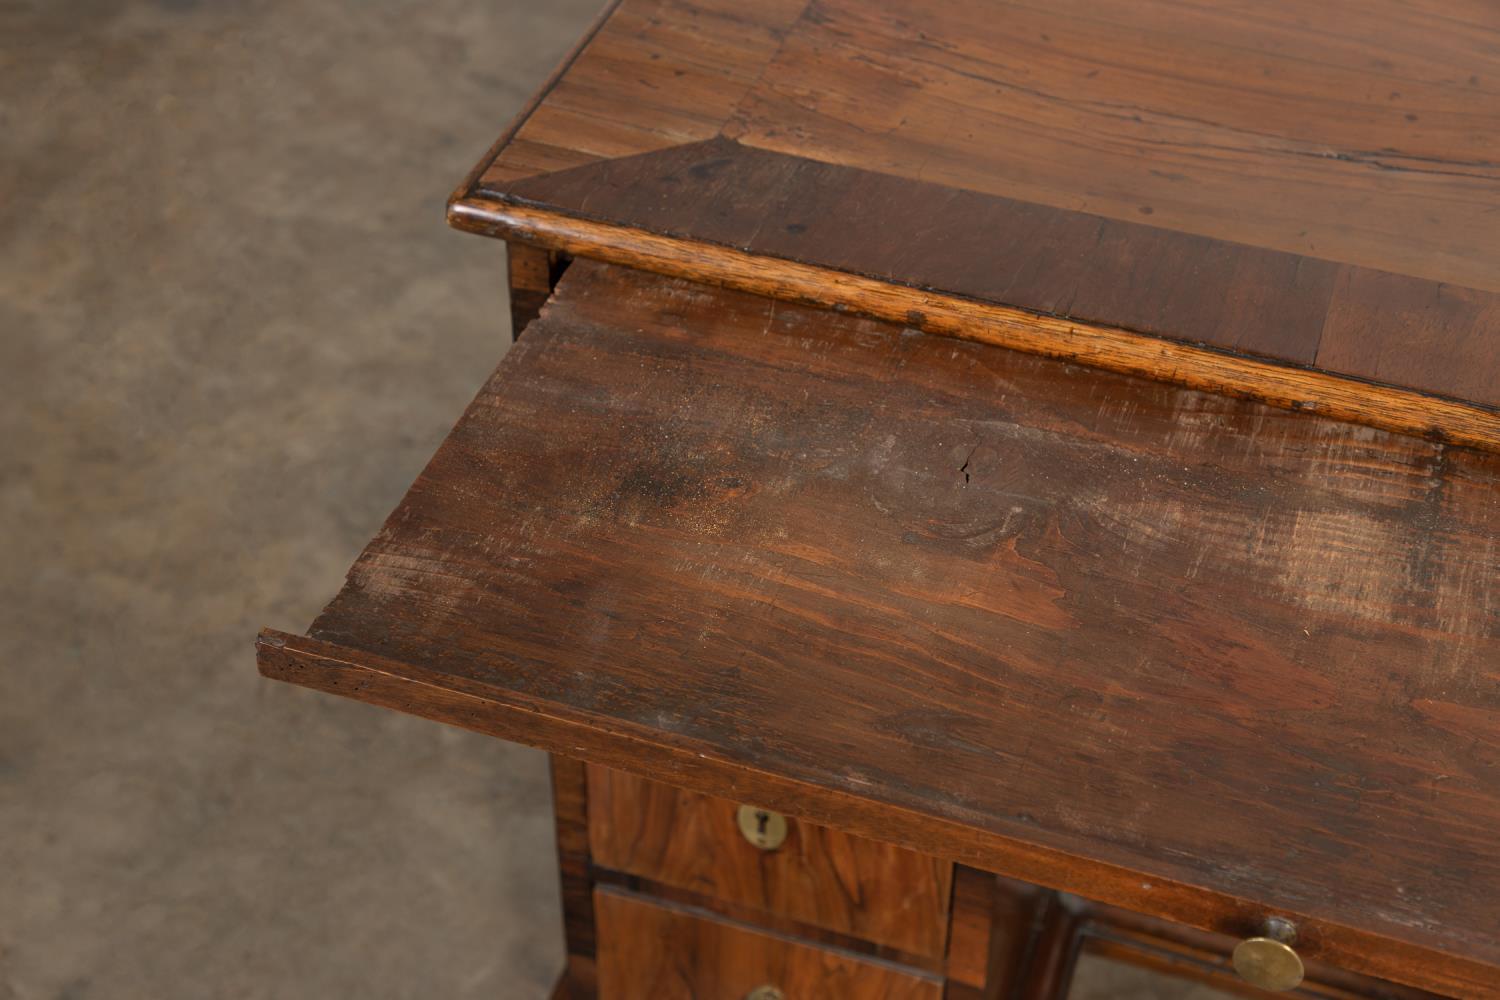 18th Century Queen Anne Keyhole Desk In Good Condition For Sale In Cloverdale, IN